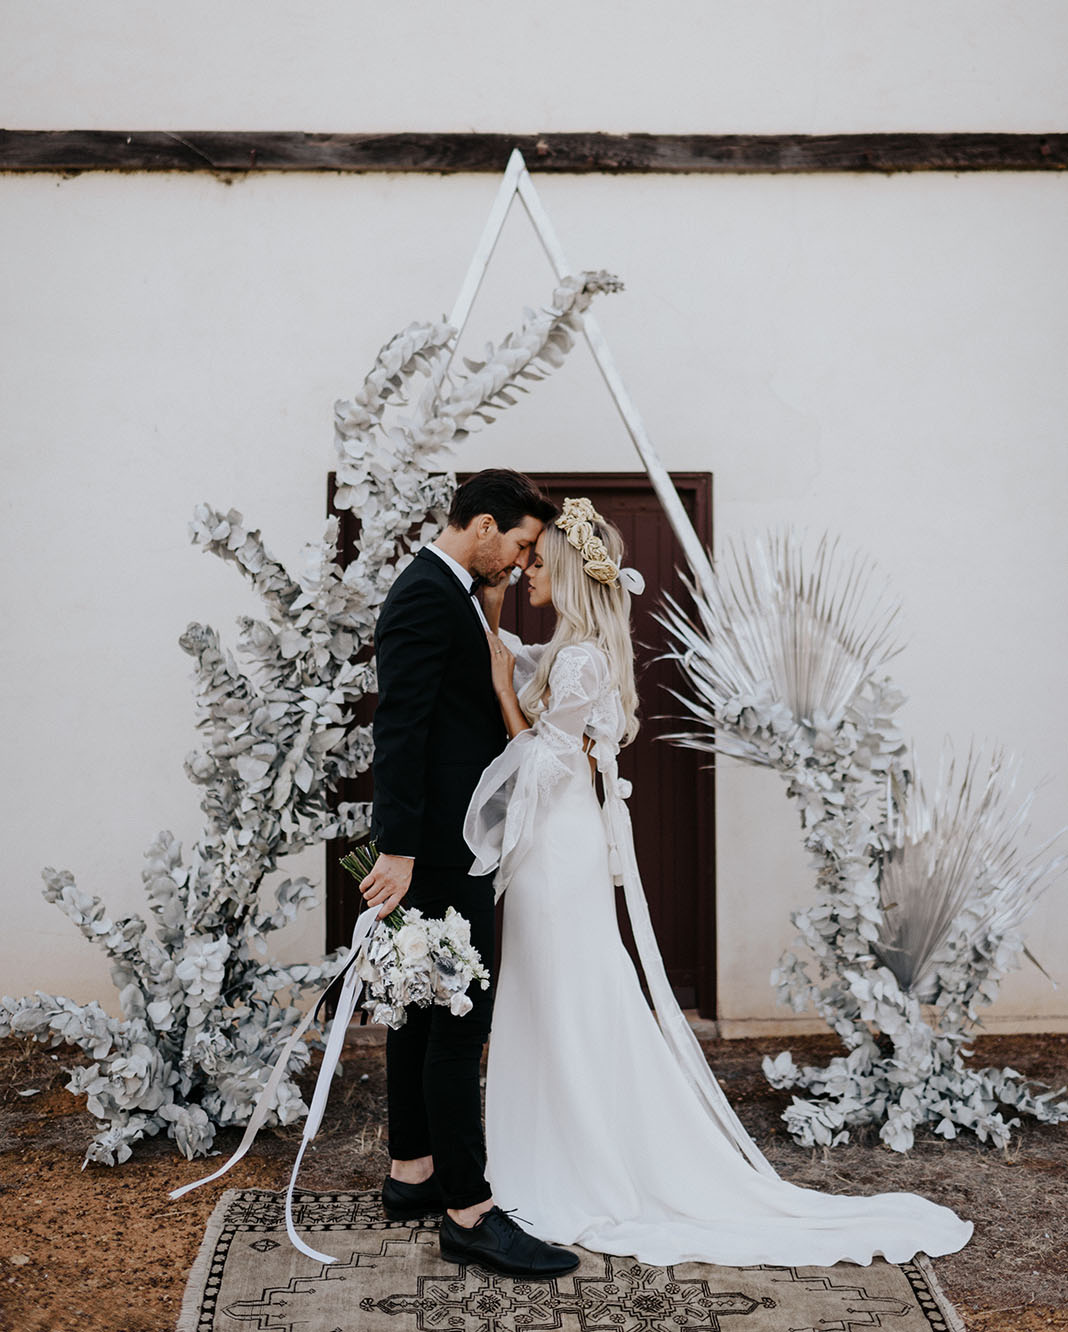 This gorgeous wedding shoot was done in silvery tones and with boho and rustic touches